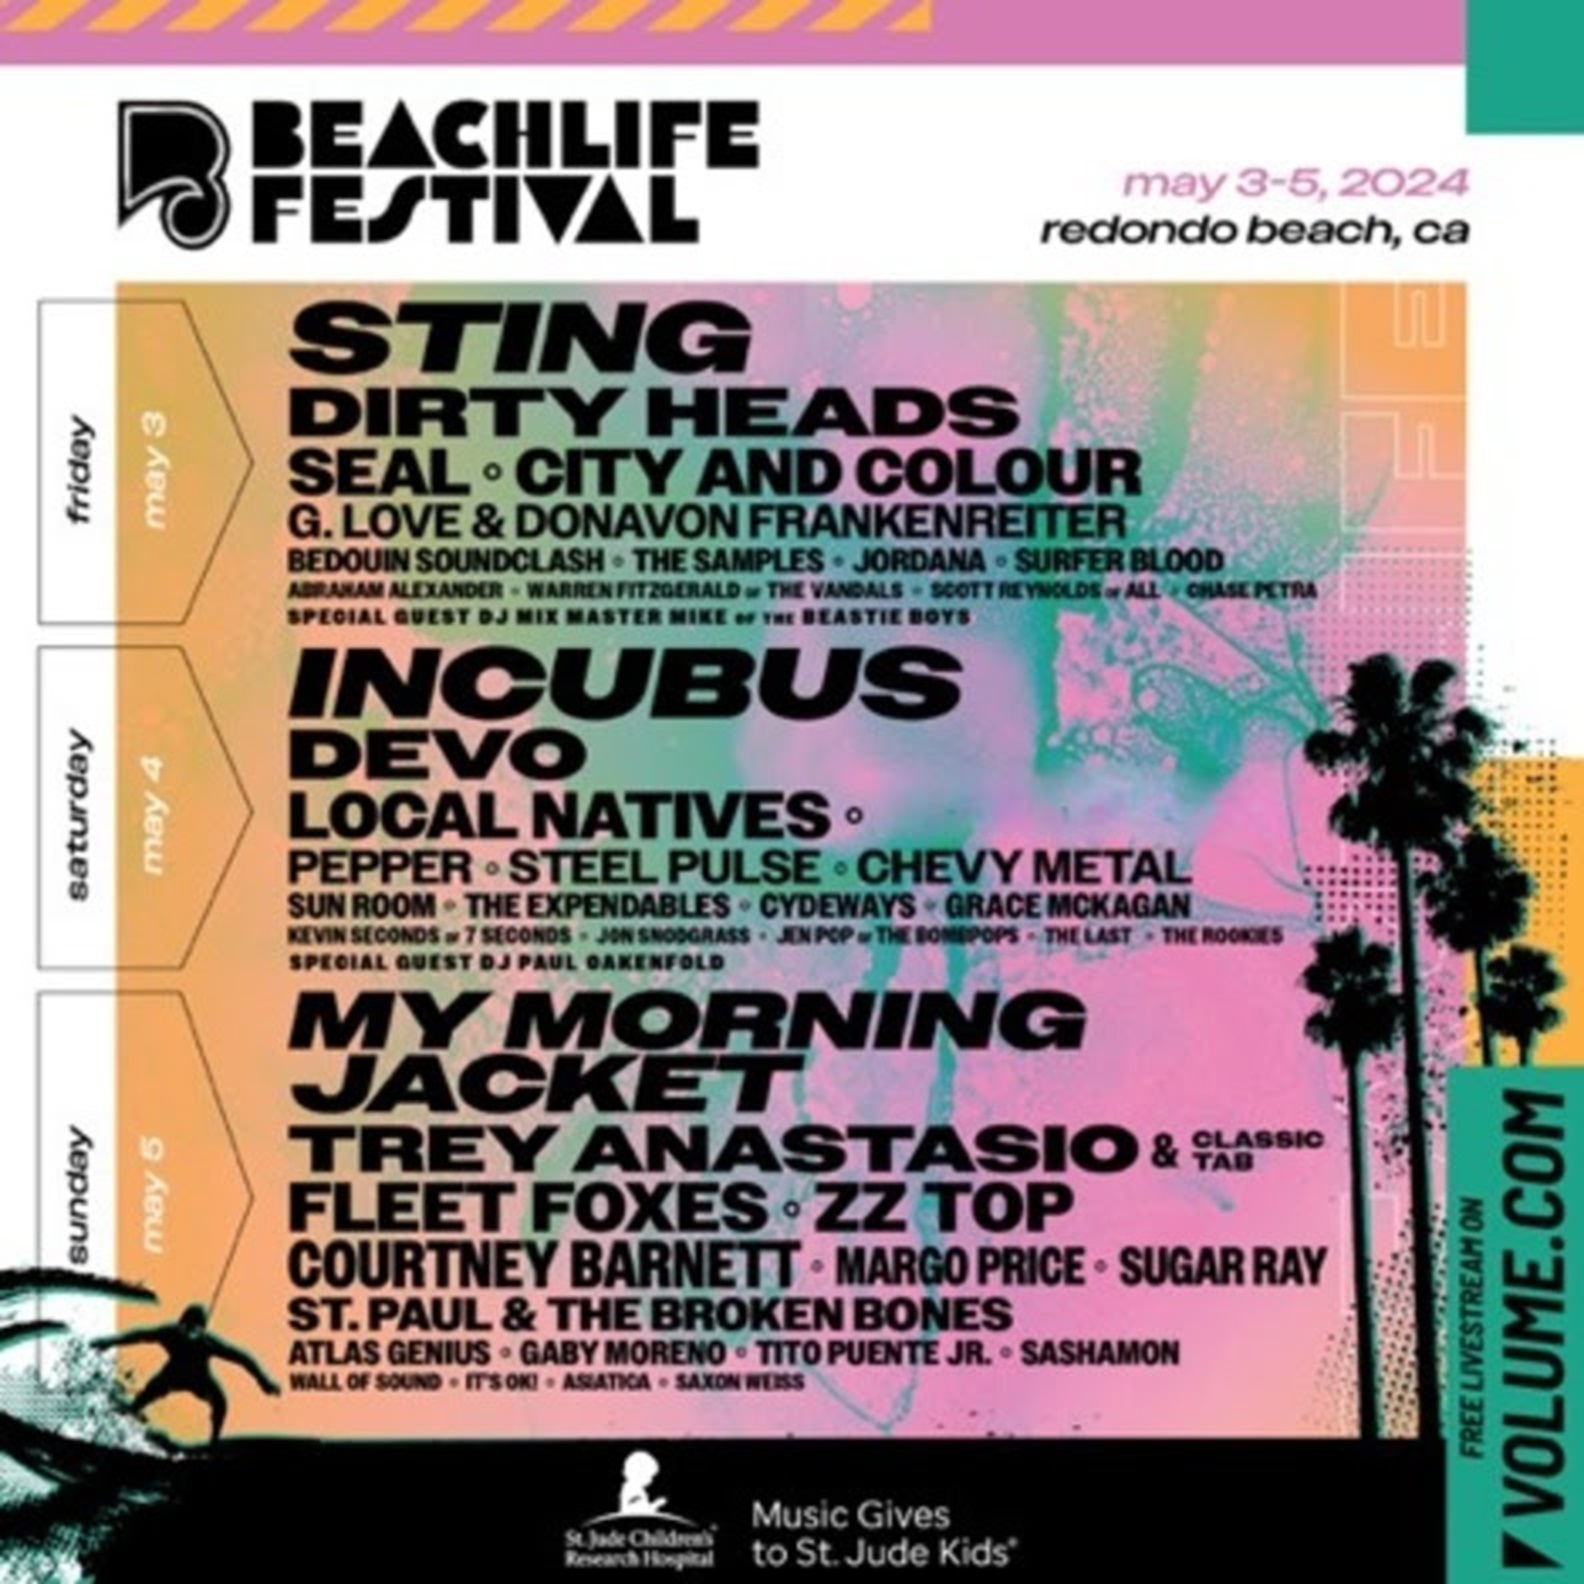 Volume.com Announces the 2024 BeachLife Music Festival Free Livestream in Partnership with Music Gives To St. Jude Kids